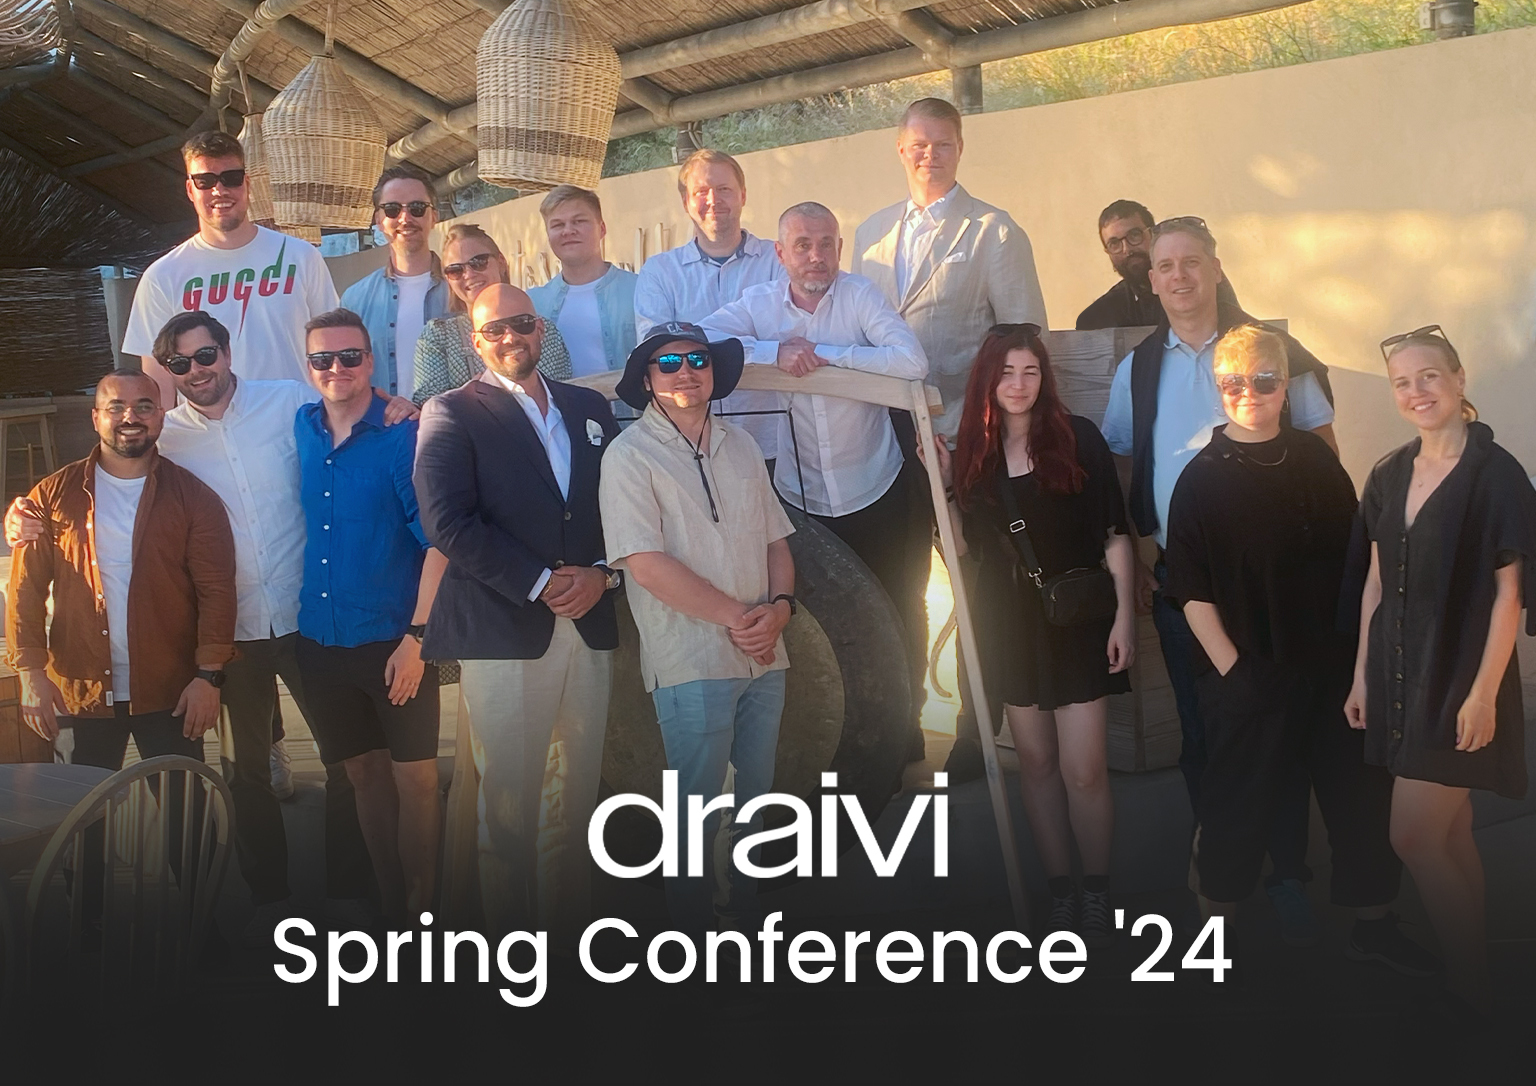 Draivi - spring conference